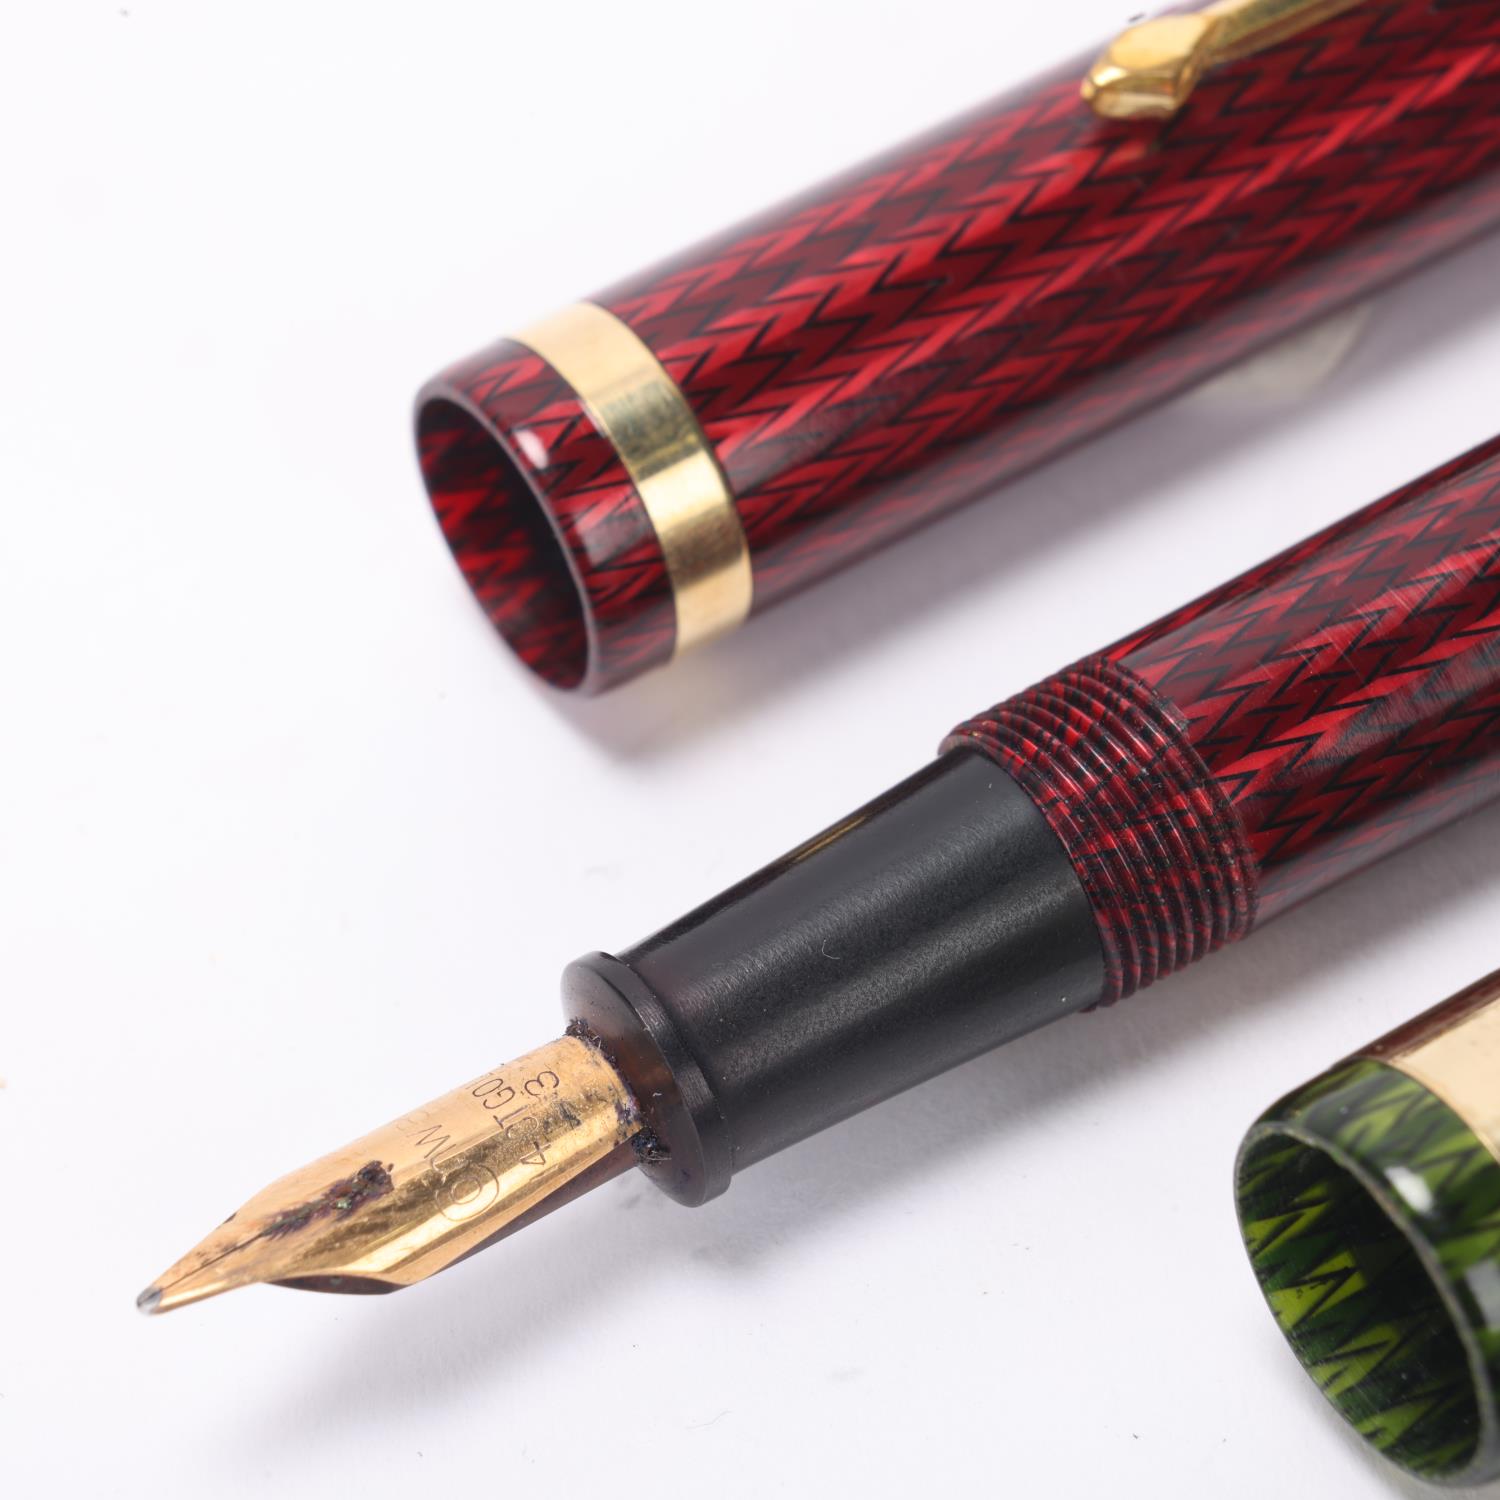 2 vintage Conway Stewart lever fill fountain pens, with 14ct nibs and herringbone lacquer bodies, - Image 3 of 4